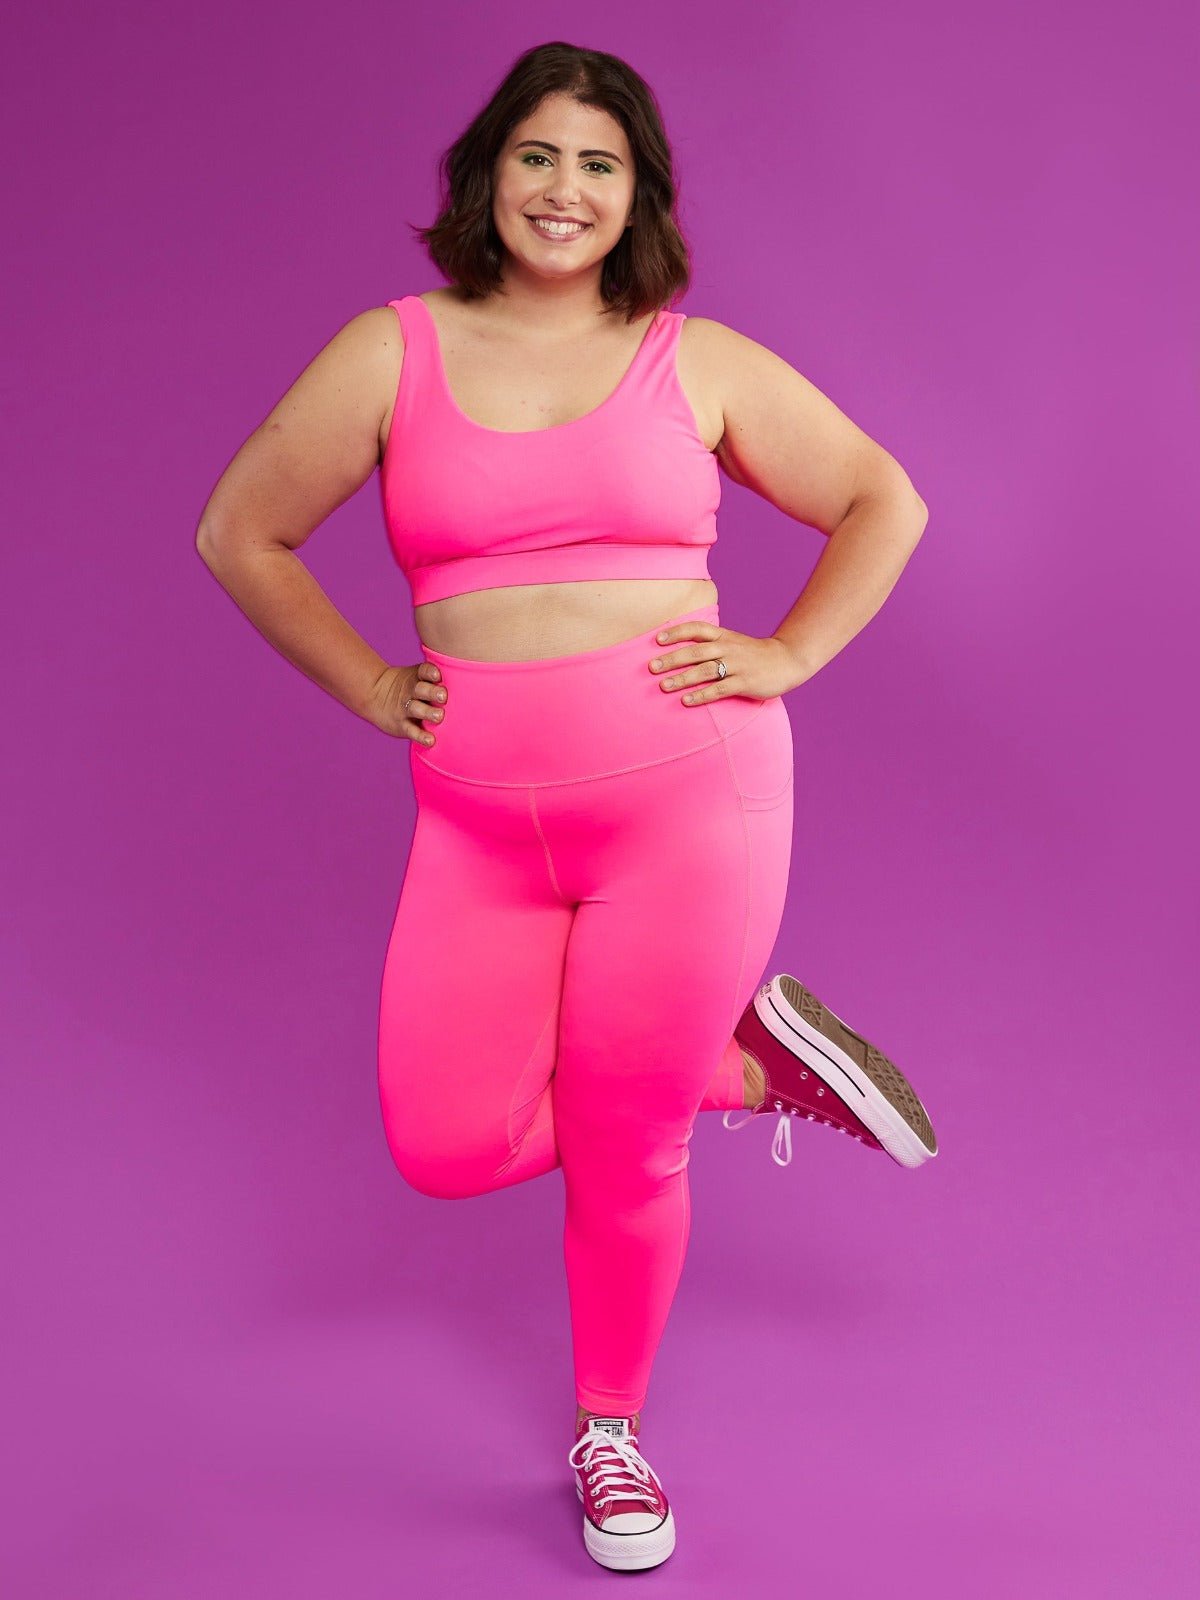 Neon Pink Everyday Legging - 7/8 length - neon pink high waisted tights with pockets